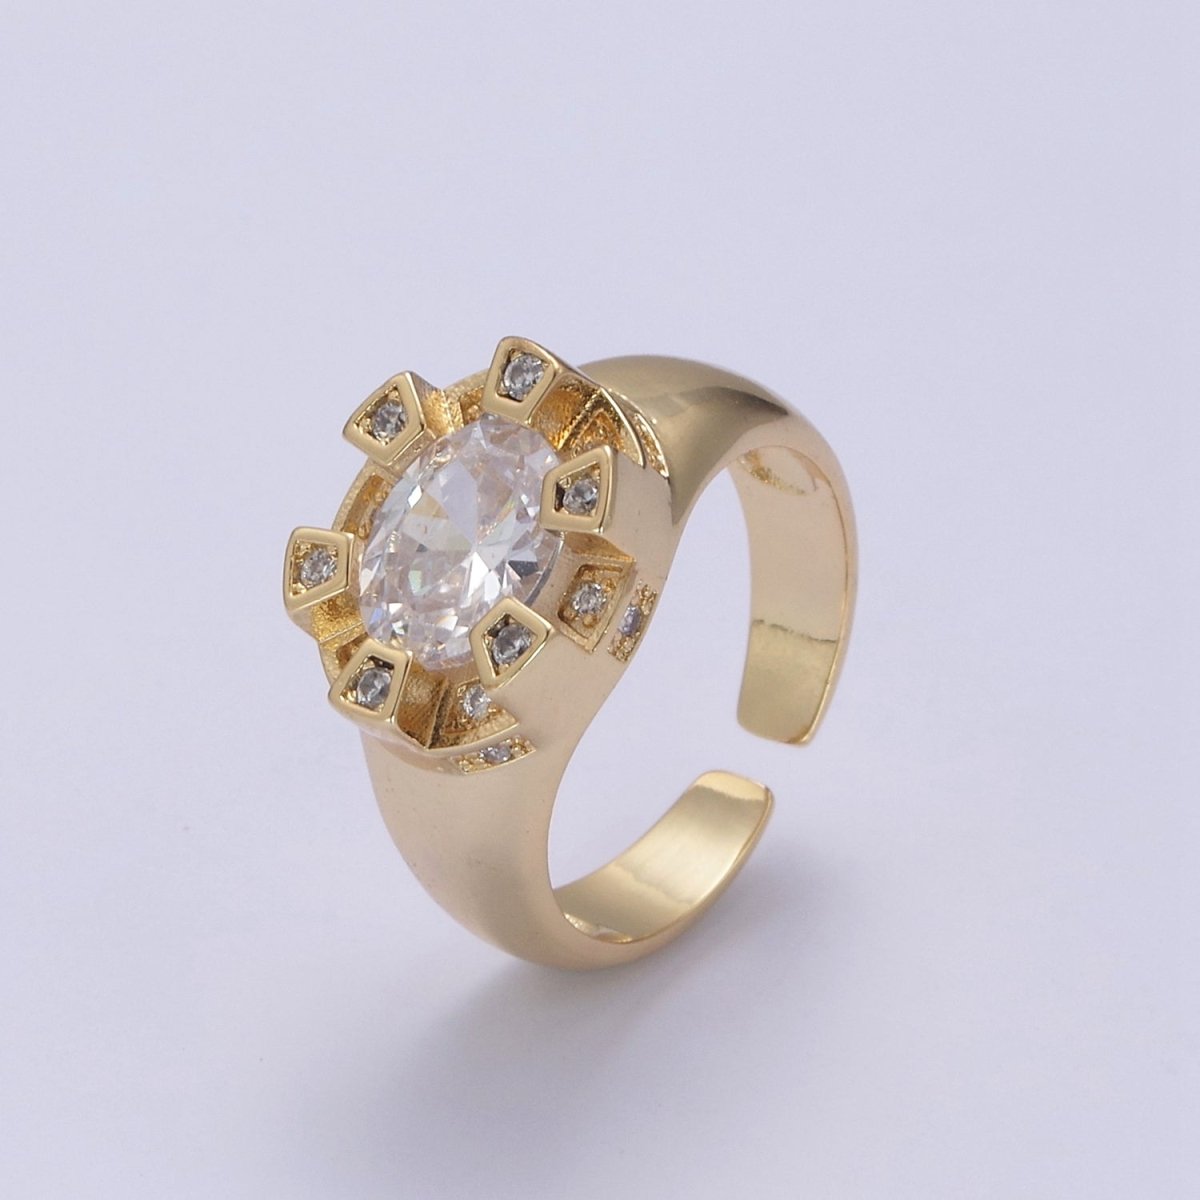 Chunky Dome Sun Ring with Cz Stone Open Adjustable Ring for Statement Jewelry U-374~U-377 - DLUXCA